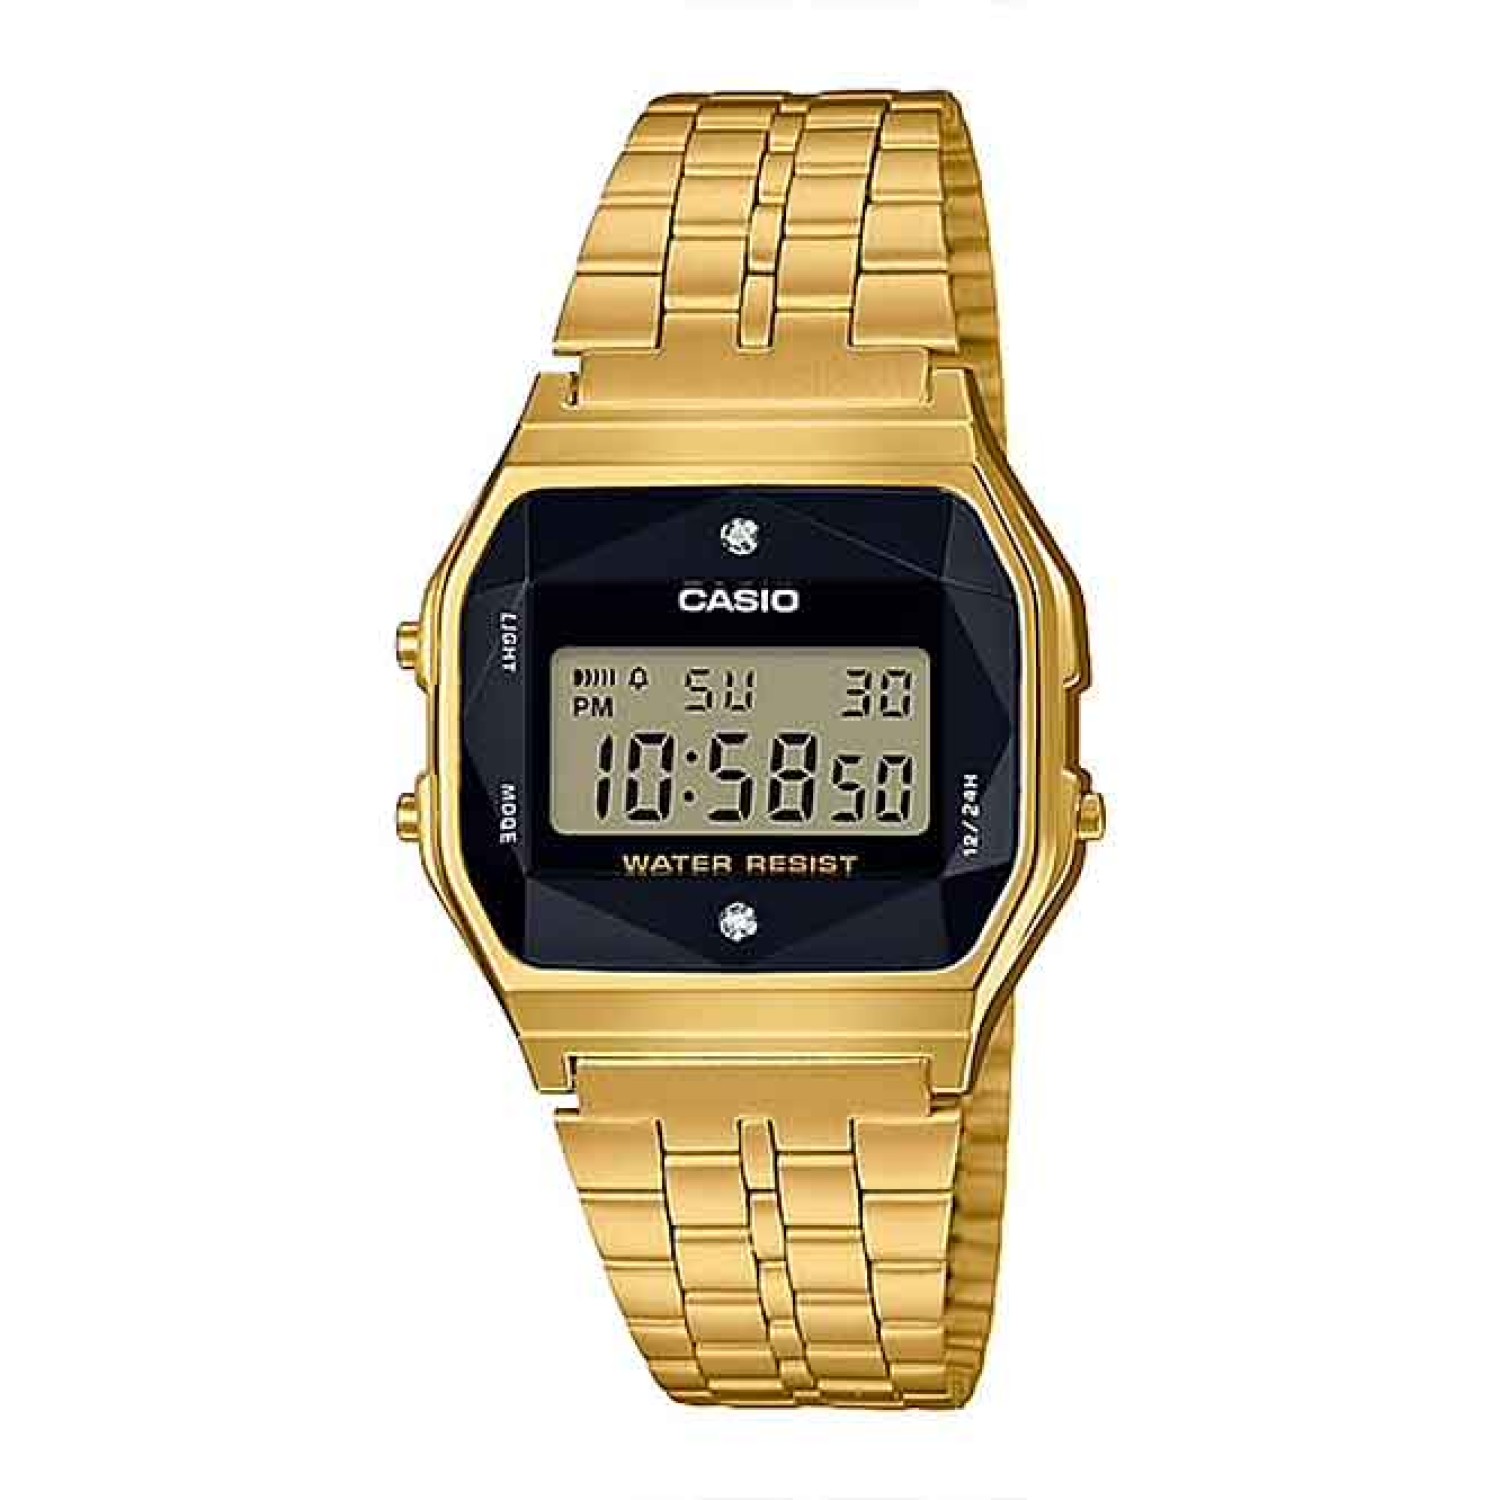 Casio Alarm Chronograph Watch A159WGED-1. Straight from the Casio Vintage Collection comes a timepiece that never goes out of style. The A159WAD-1 combines style with features Casio is known for such as an LED light and a 1/100th second stopwatch. This mo